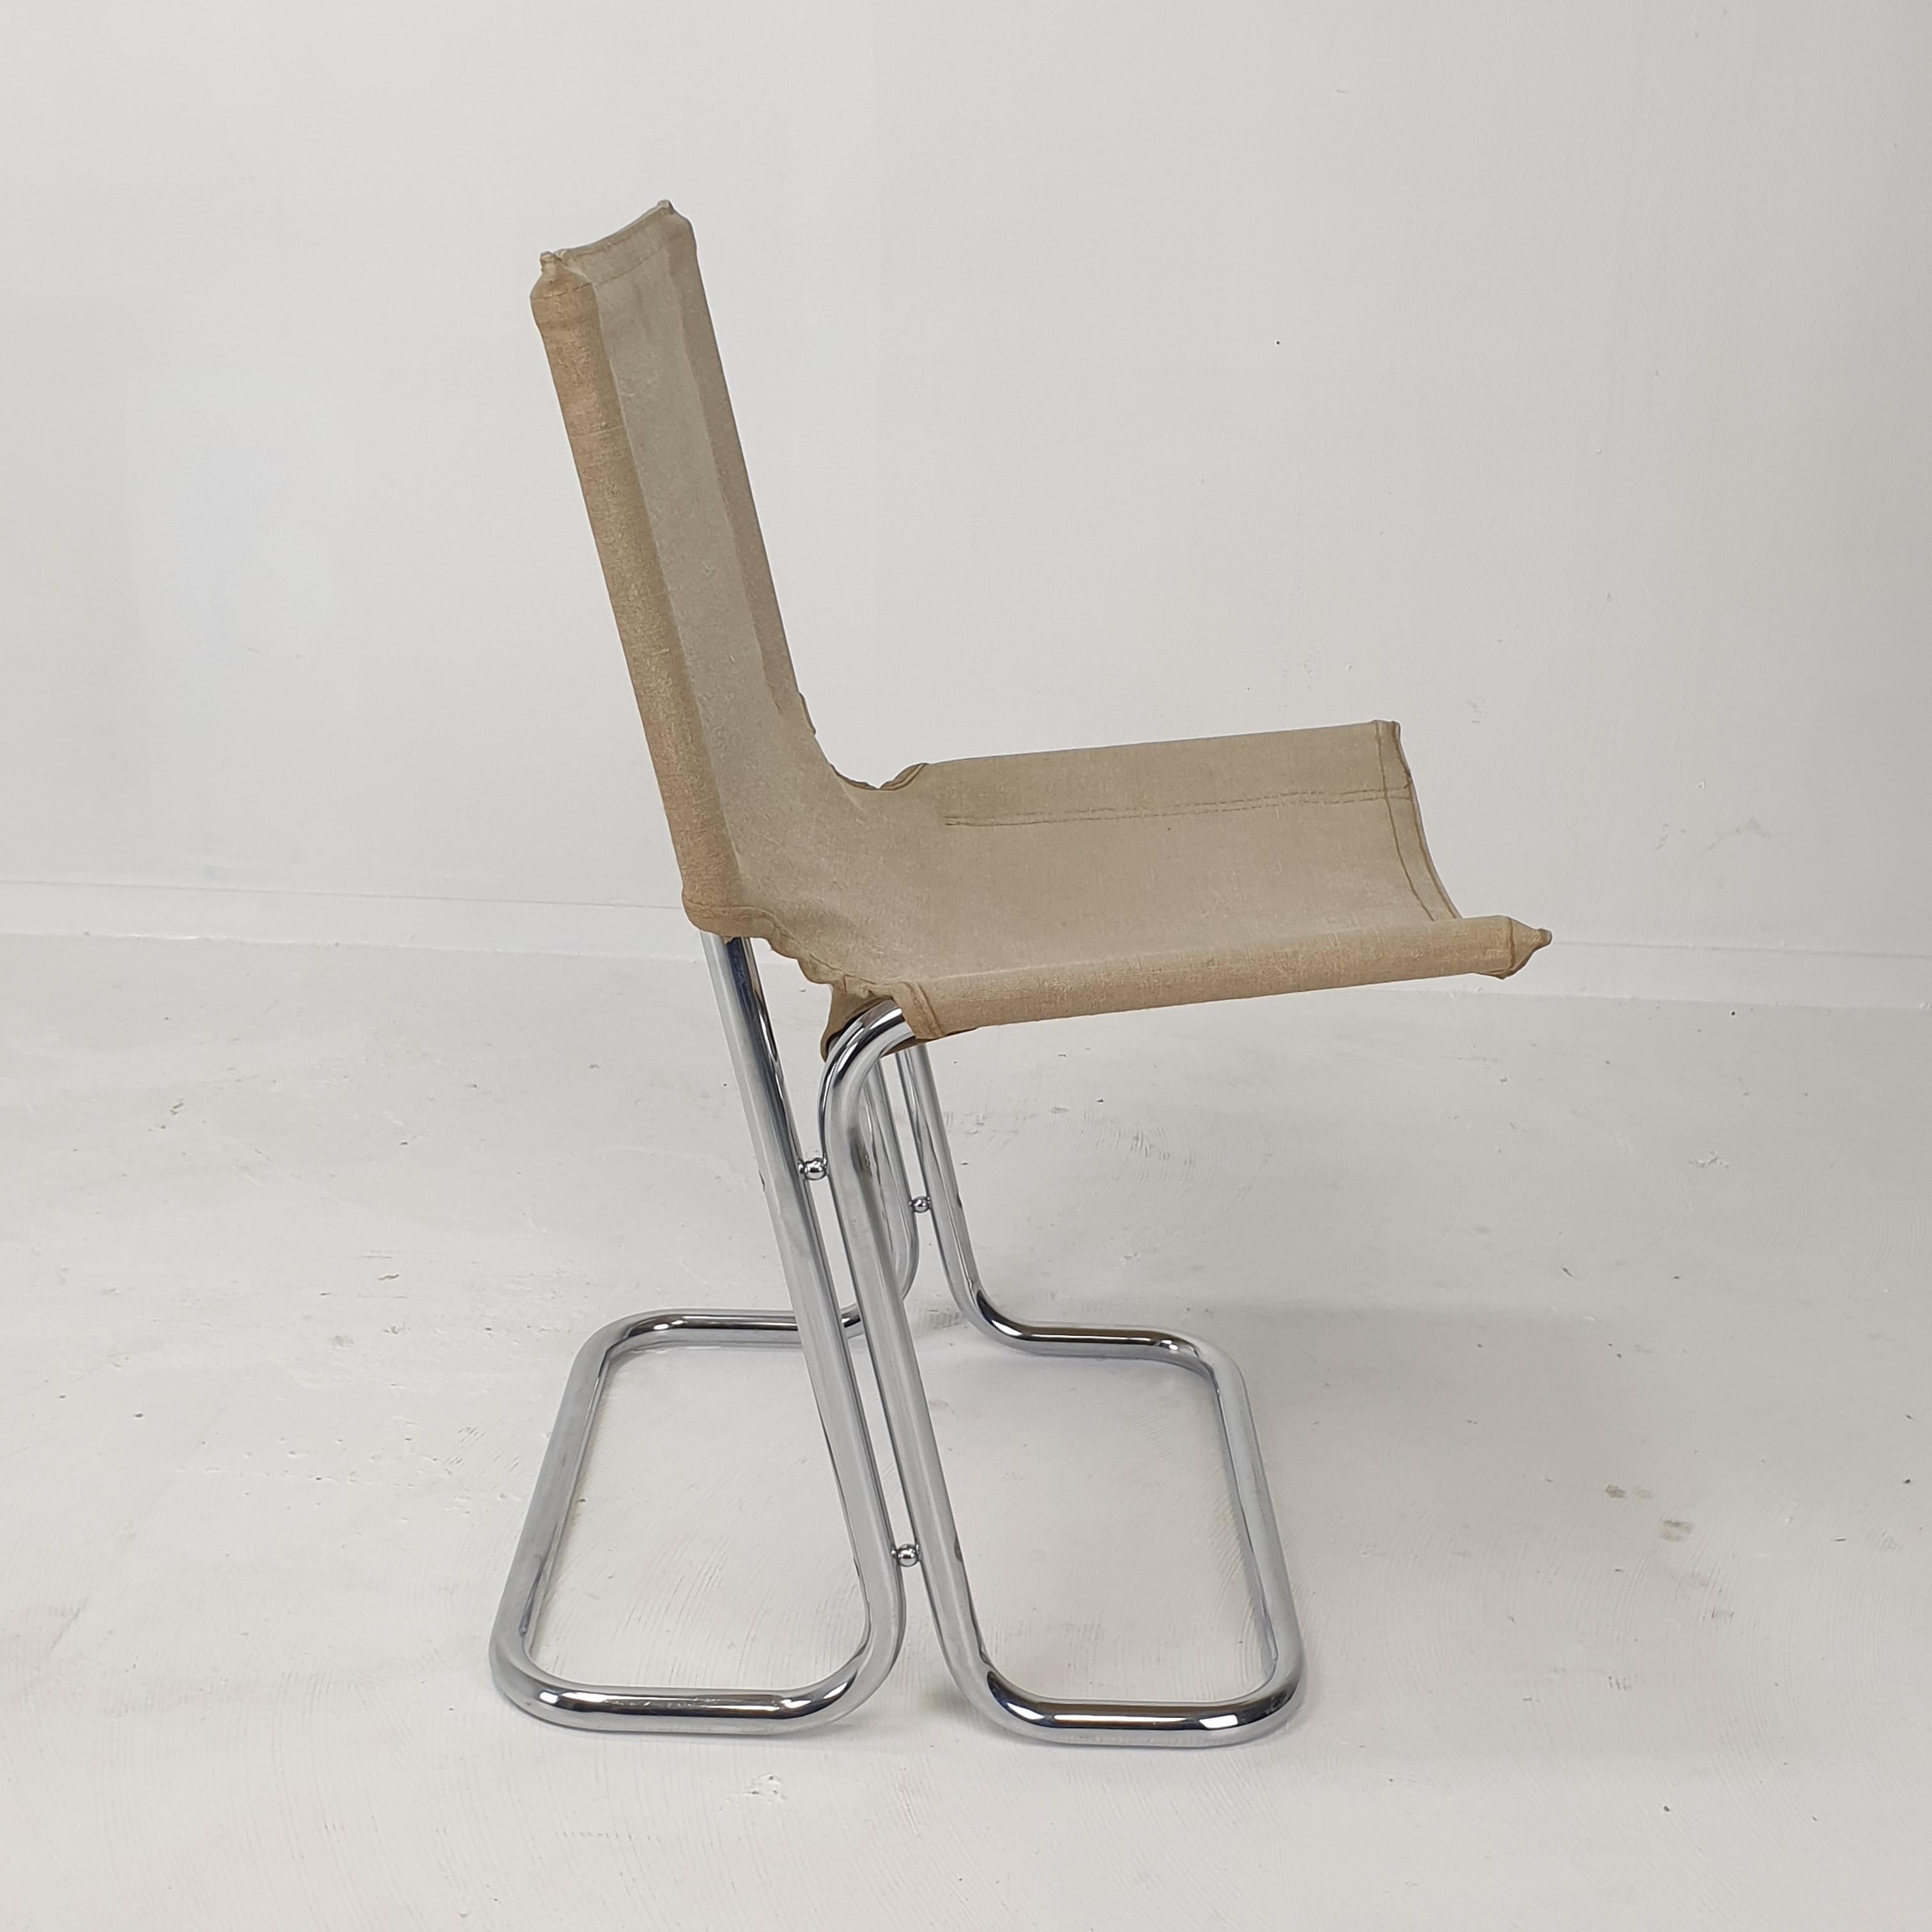 Set of 2 Italian Canvas and Chromed Metal Chairs, 1970's For Sale 11